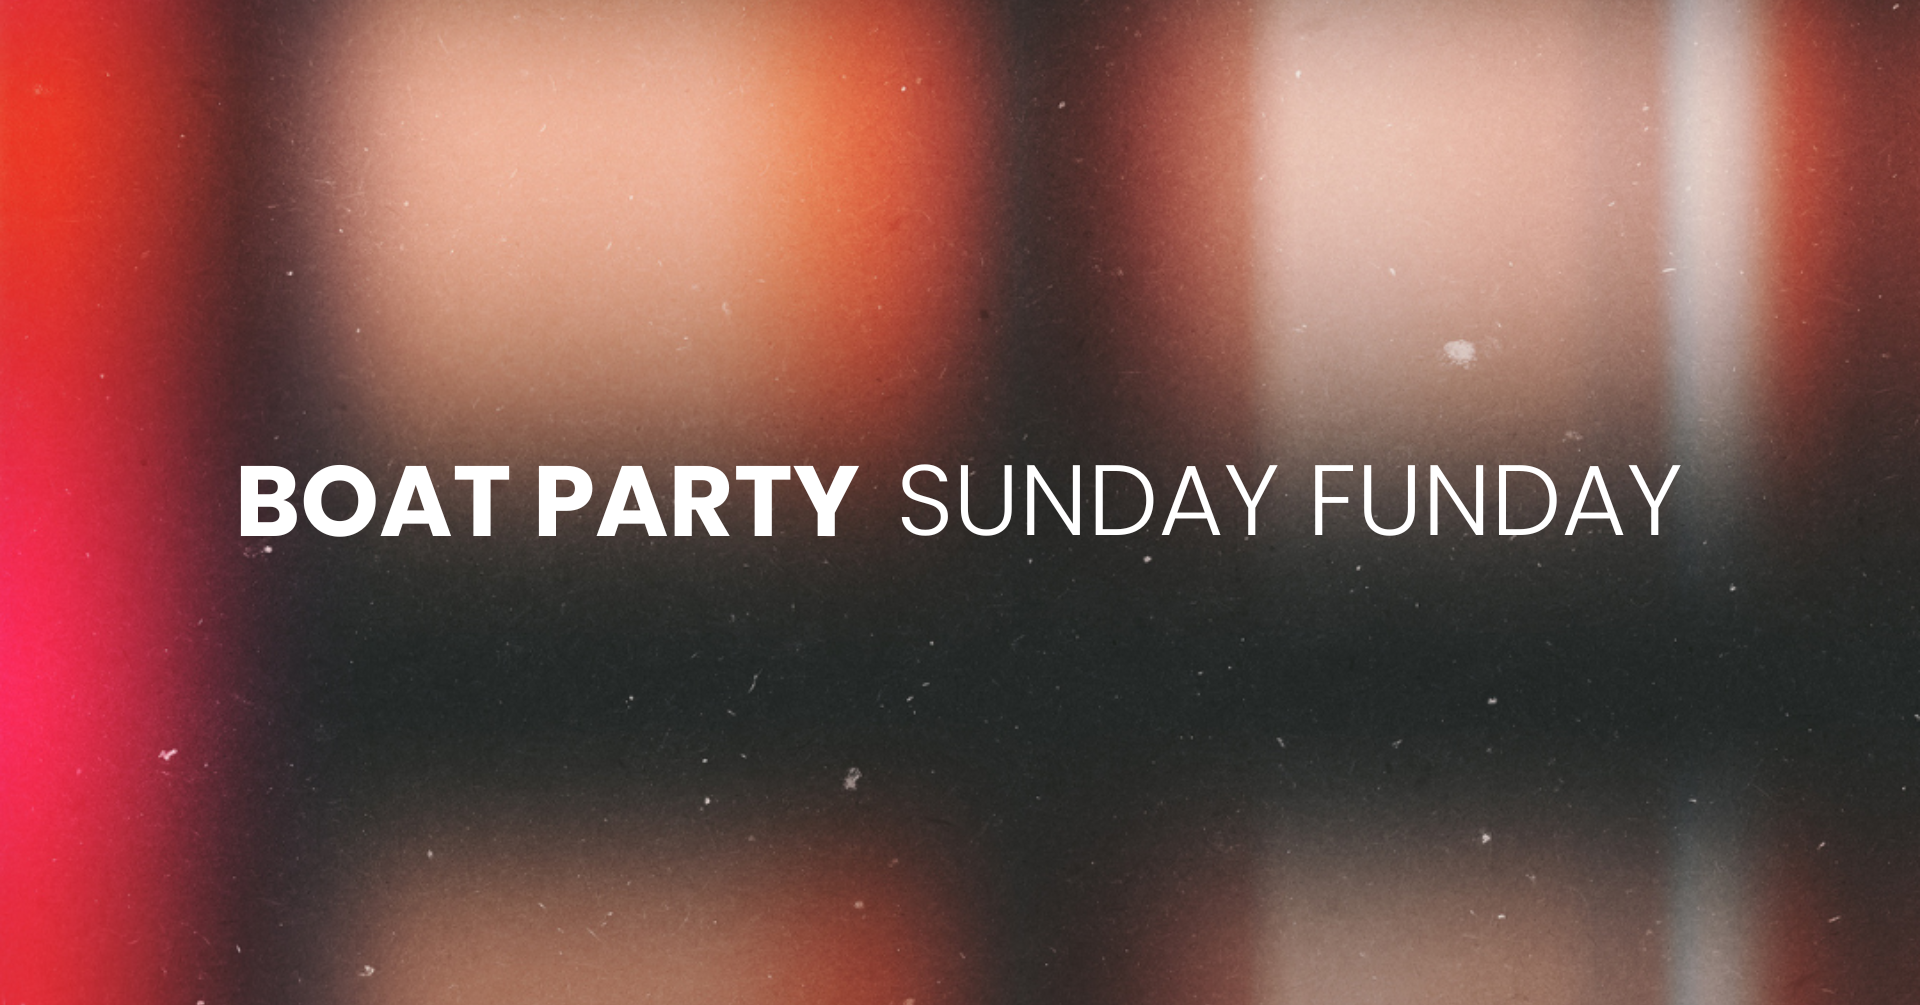 Boat Party Sunday Funday w/ Intaktogene, Pascale Voltaire, vom Feisten, Daniel Neuland, Meloko - フライヤー表